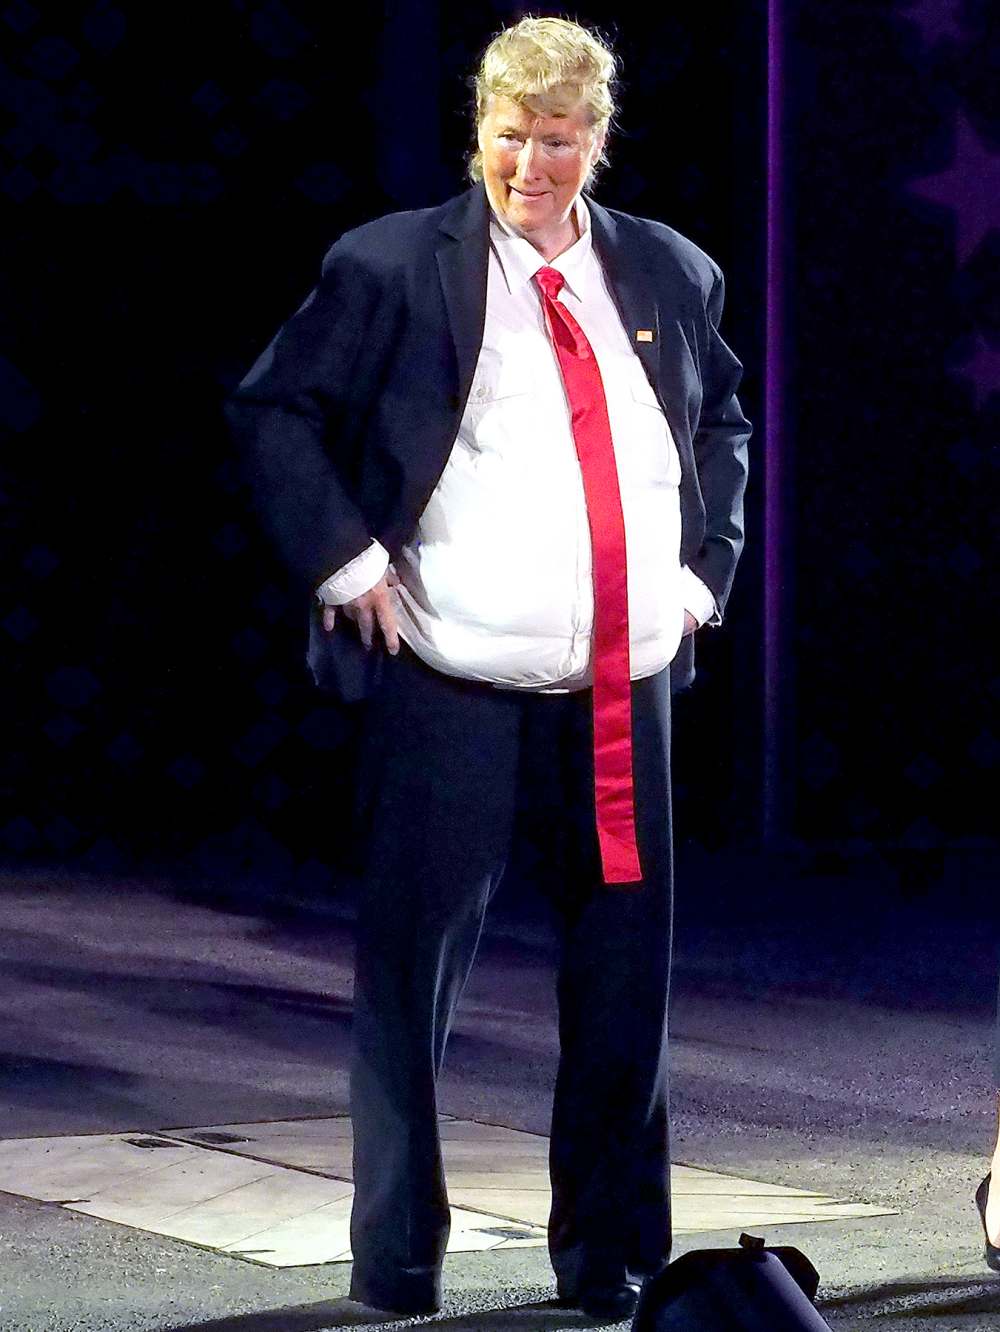 Meryl Streep, dressed as Donald Trump, performs onstage at the 2016 Public Theater Gala at Delacorte Theater on June 6, 2016 in New York City.